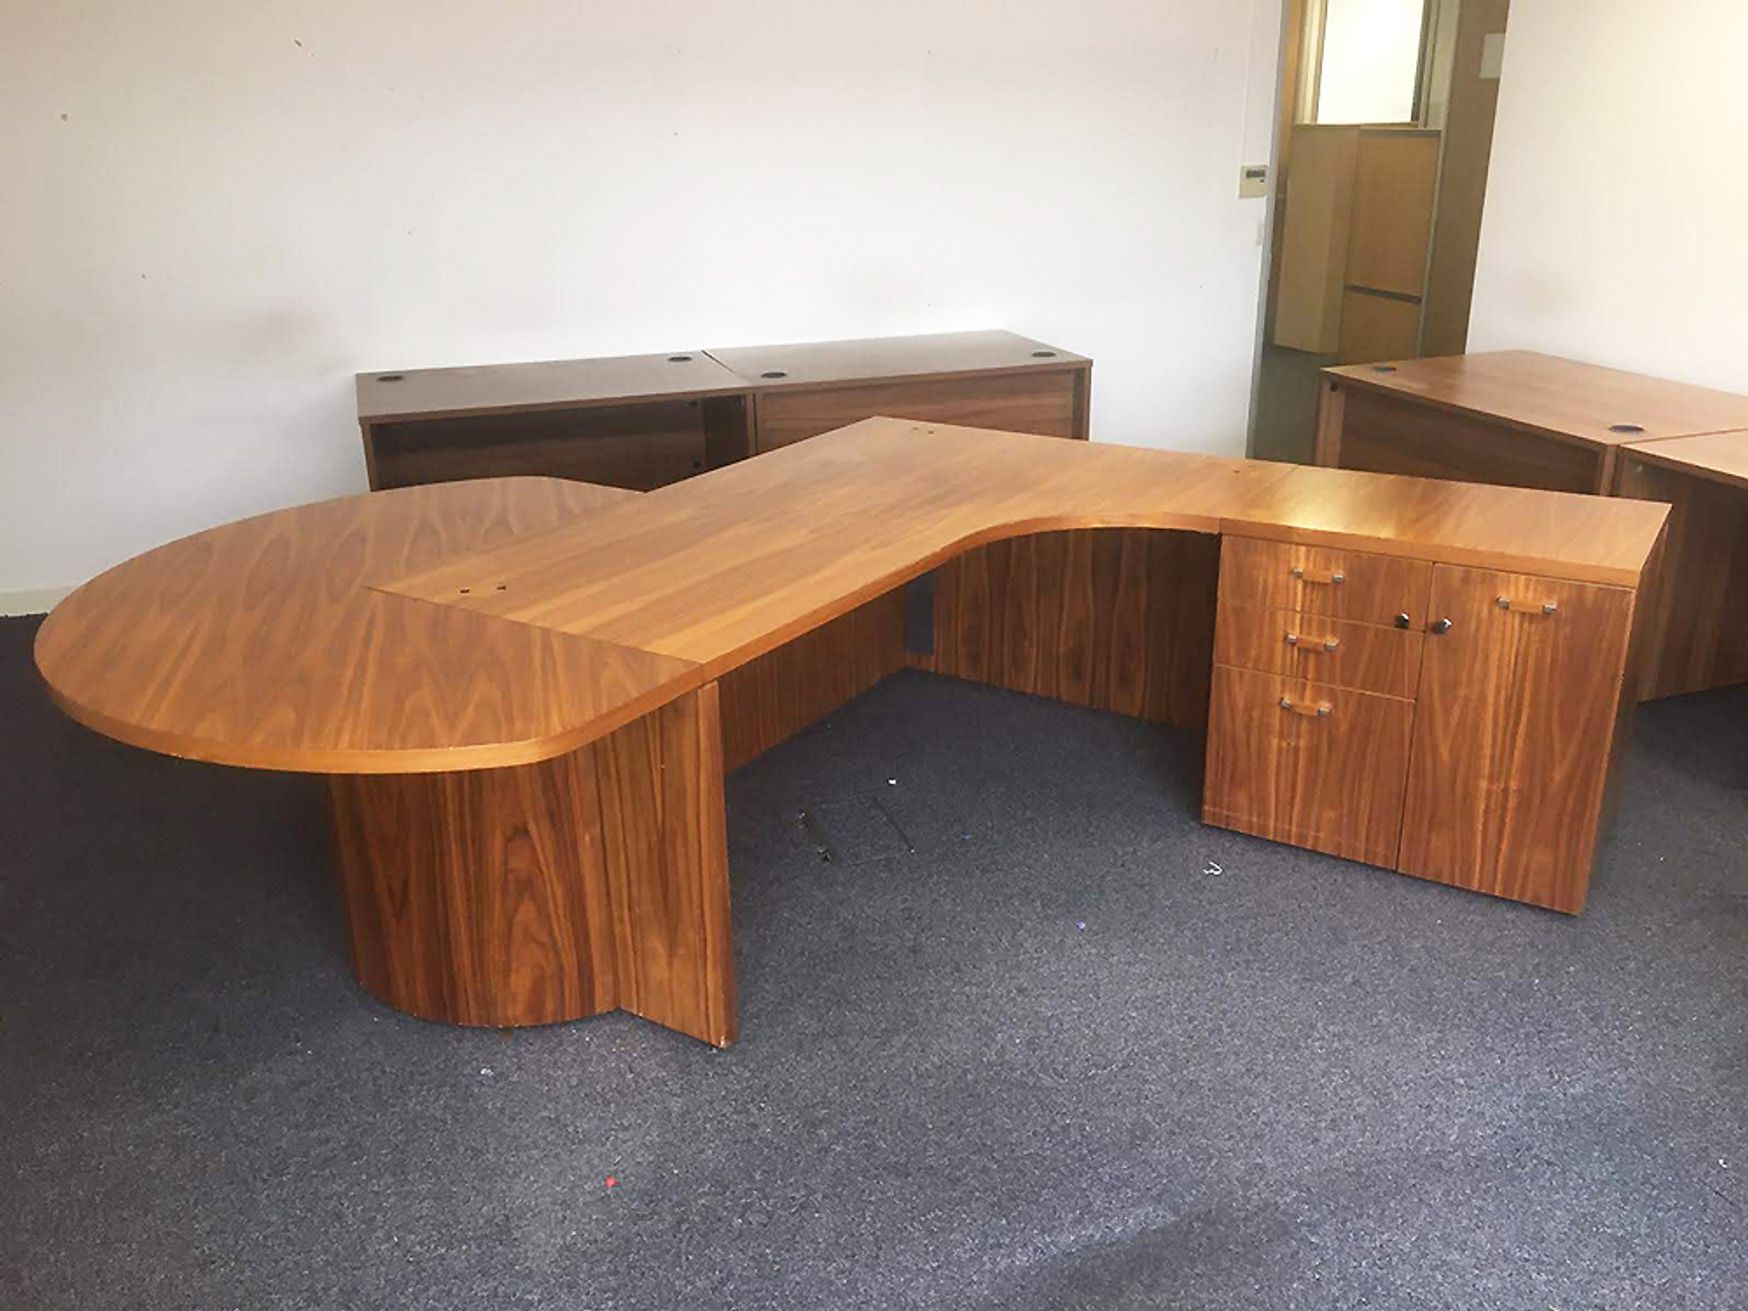 Want Dont : Second Hand Office Furniture - Used Office Furniture |  Desks | Executive | Used Sven Executive Desk with Integrated Storage and  Meeting Table End